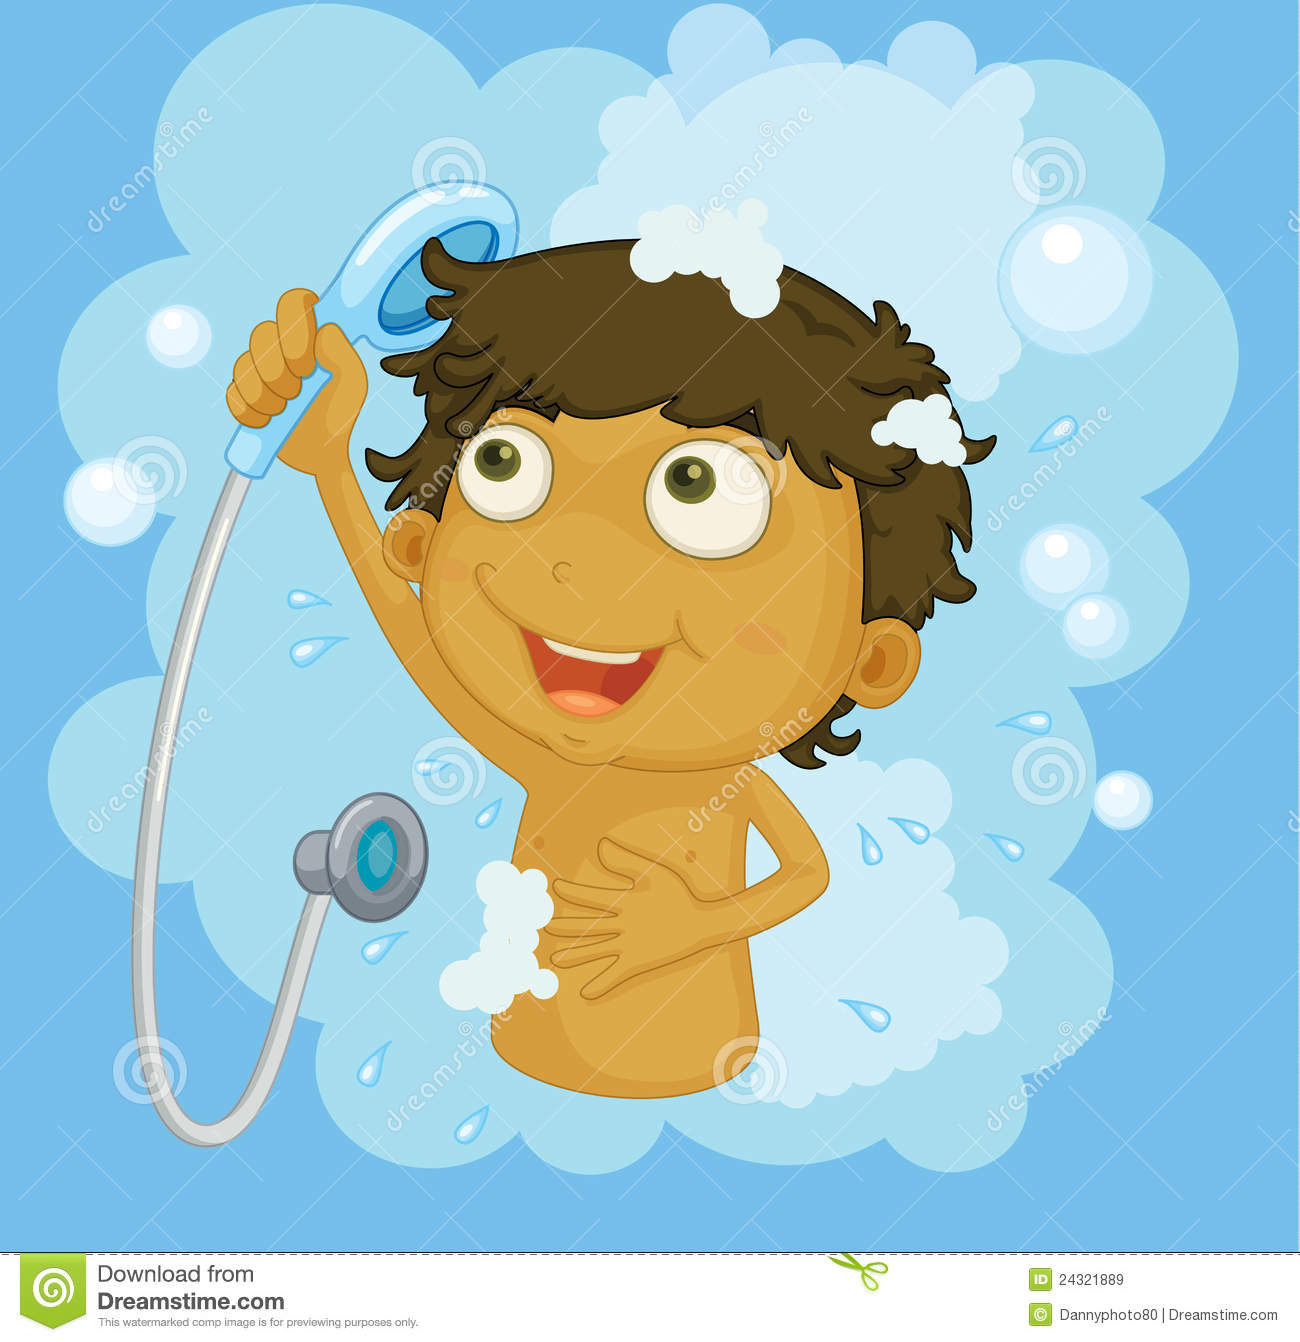 Shower Clipart Shower Time Royalty Free Stock